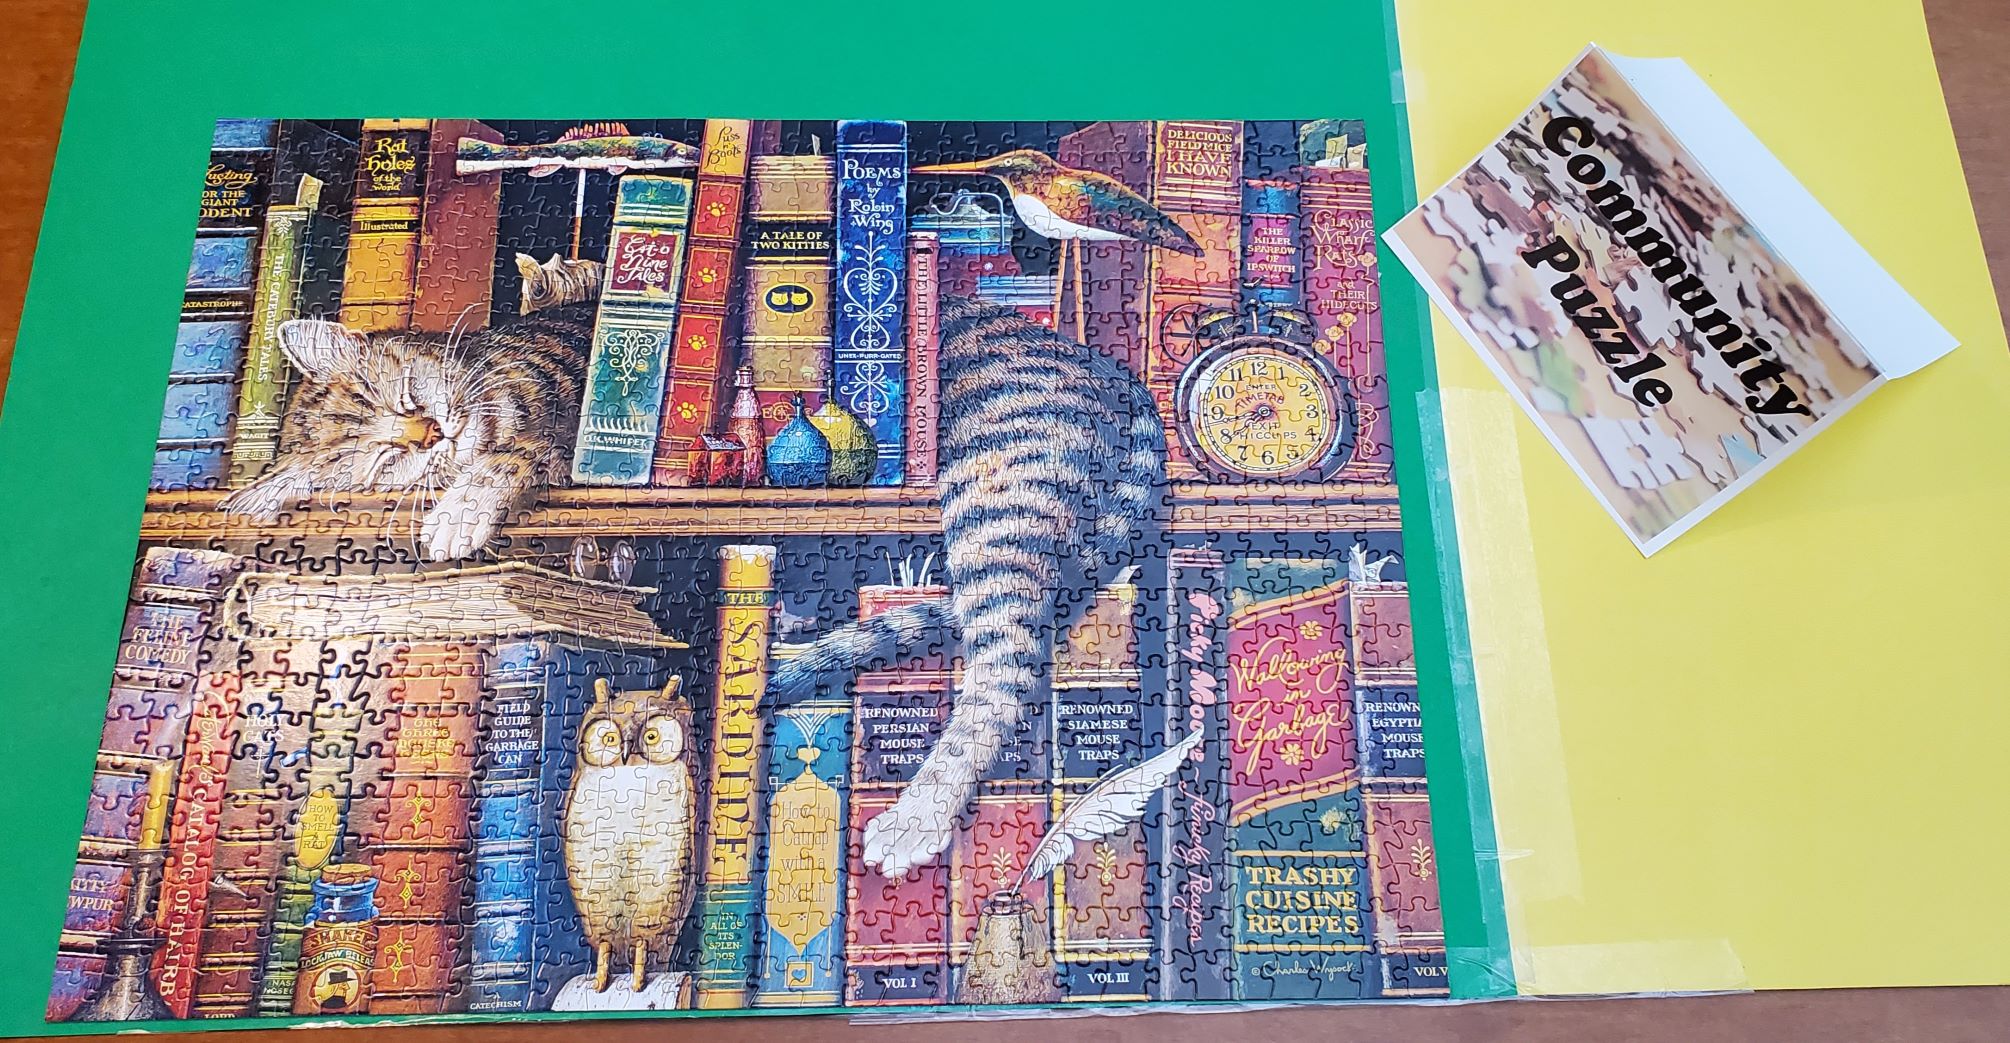 Jigsaw puzzle of bookshelf with a cat sleeping withing the books.